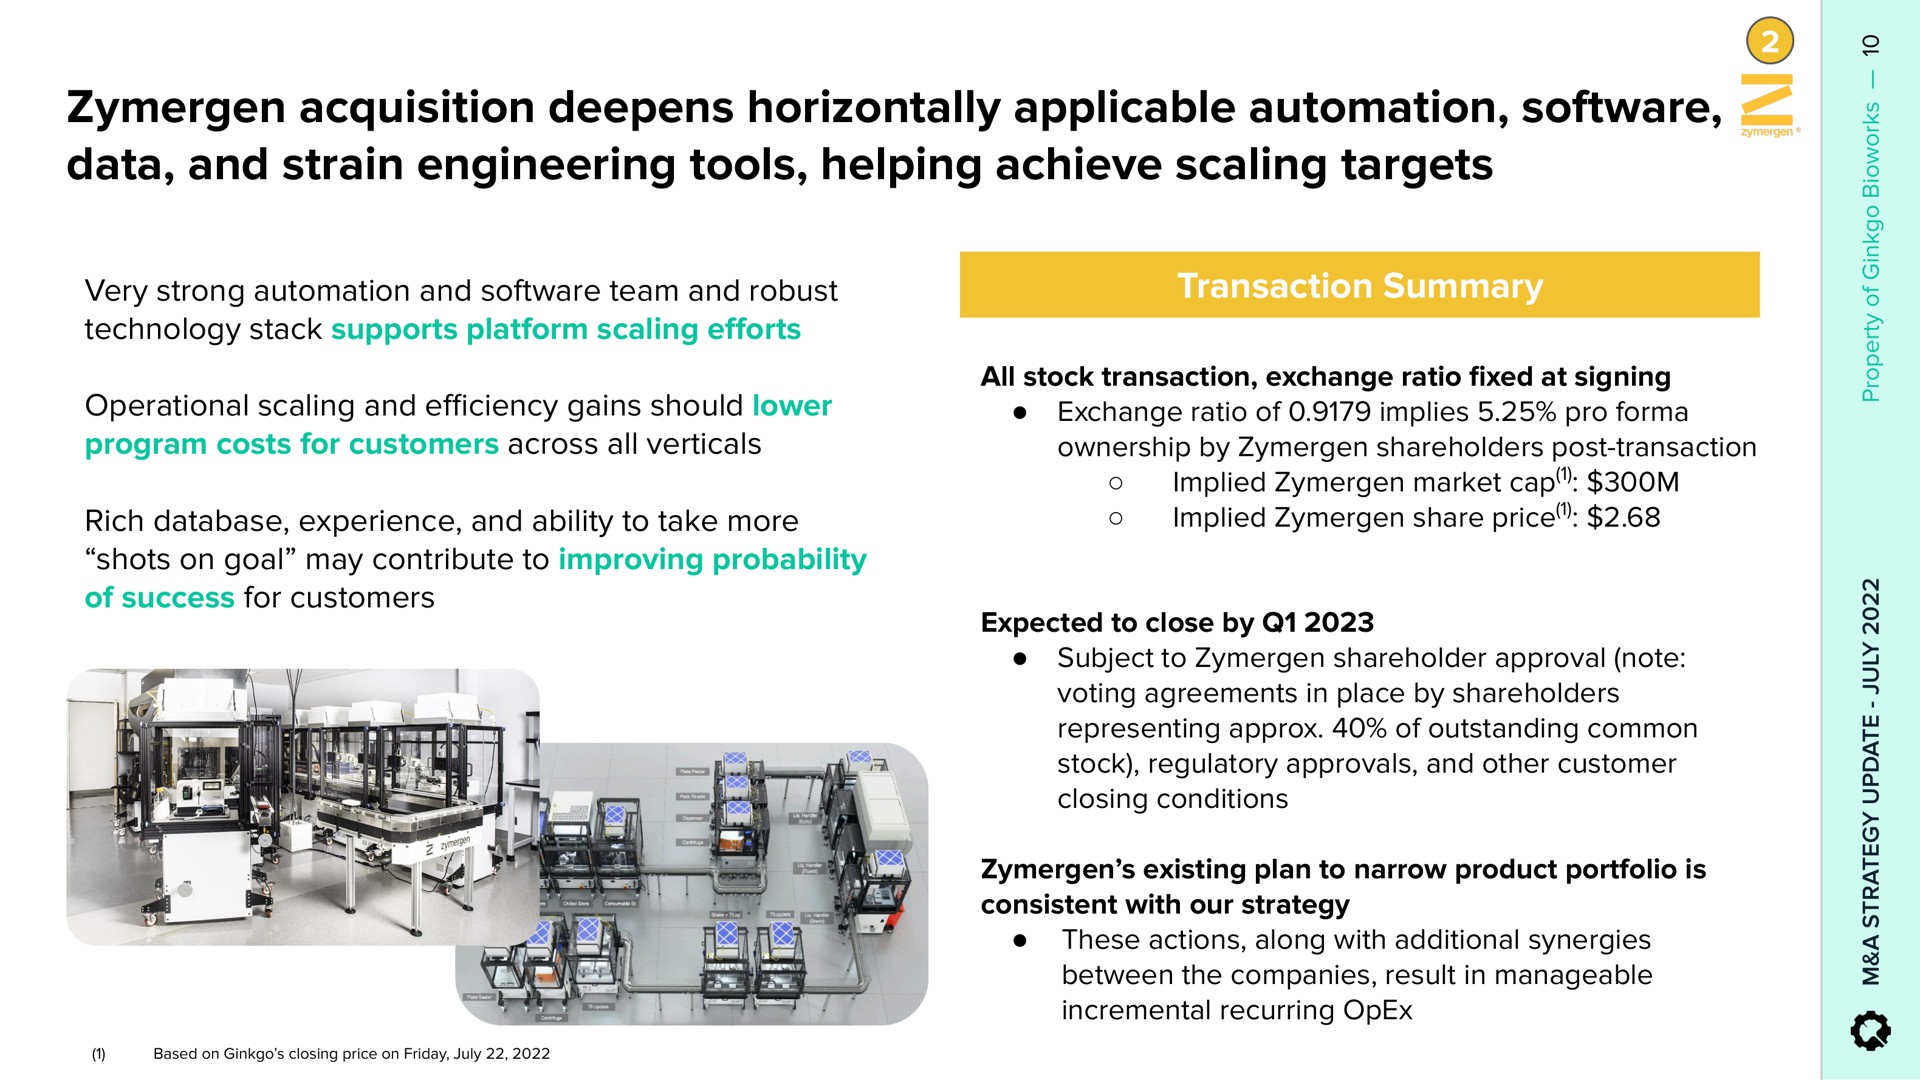 acquisition deepens horizontally applicable data and strain engineering tools helping achieve scaling targets | Ginkgo